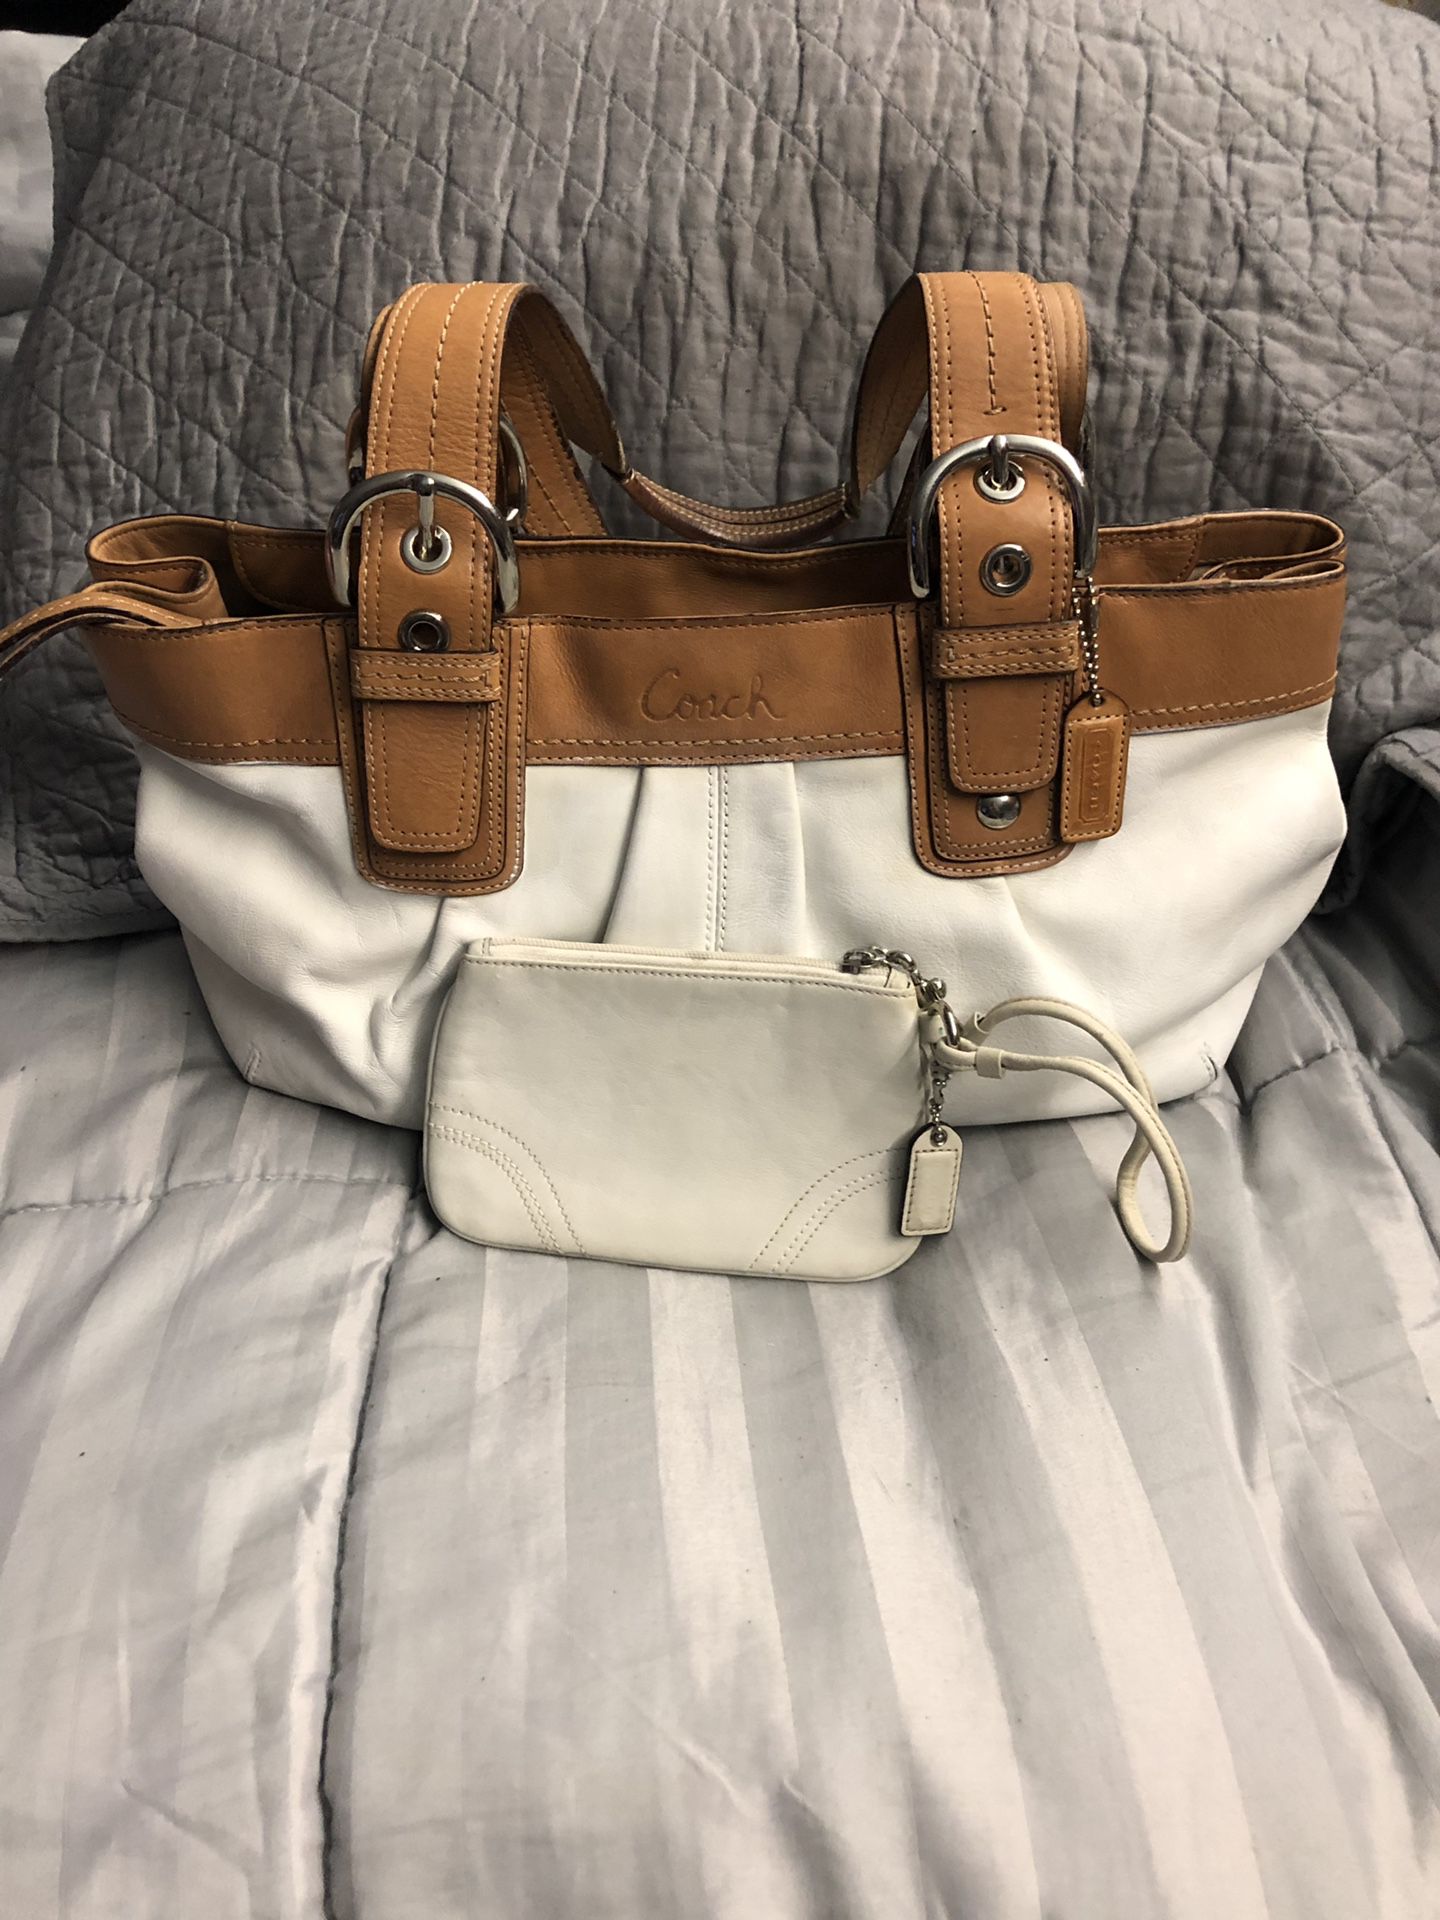 Shoulder bag leather coach with free wristlet